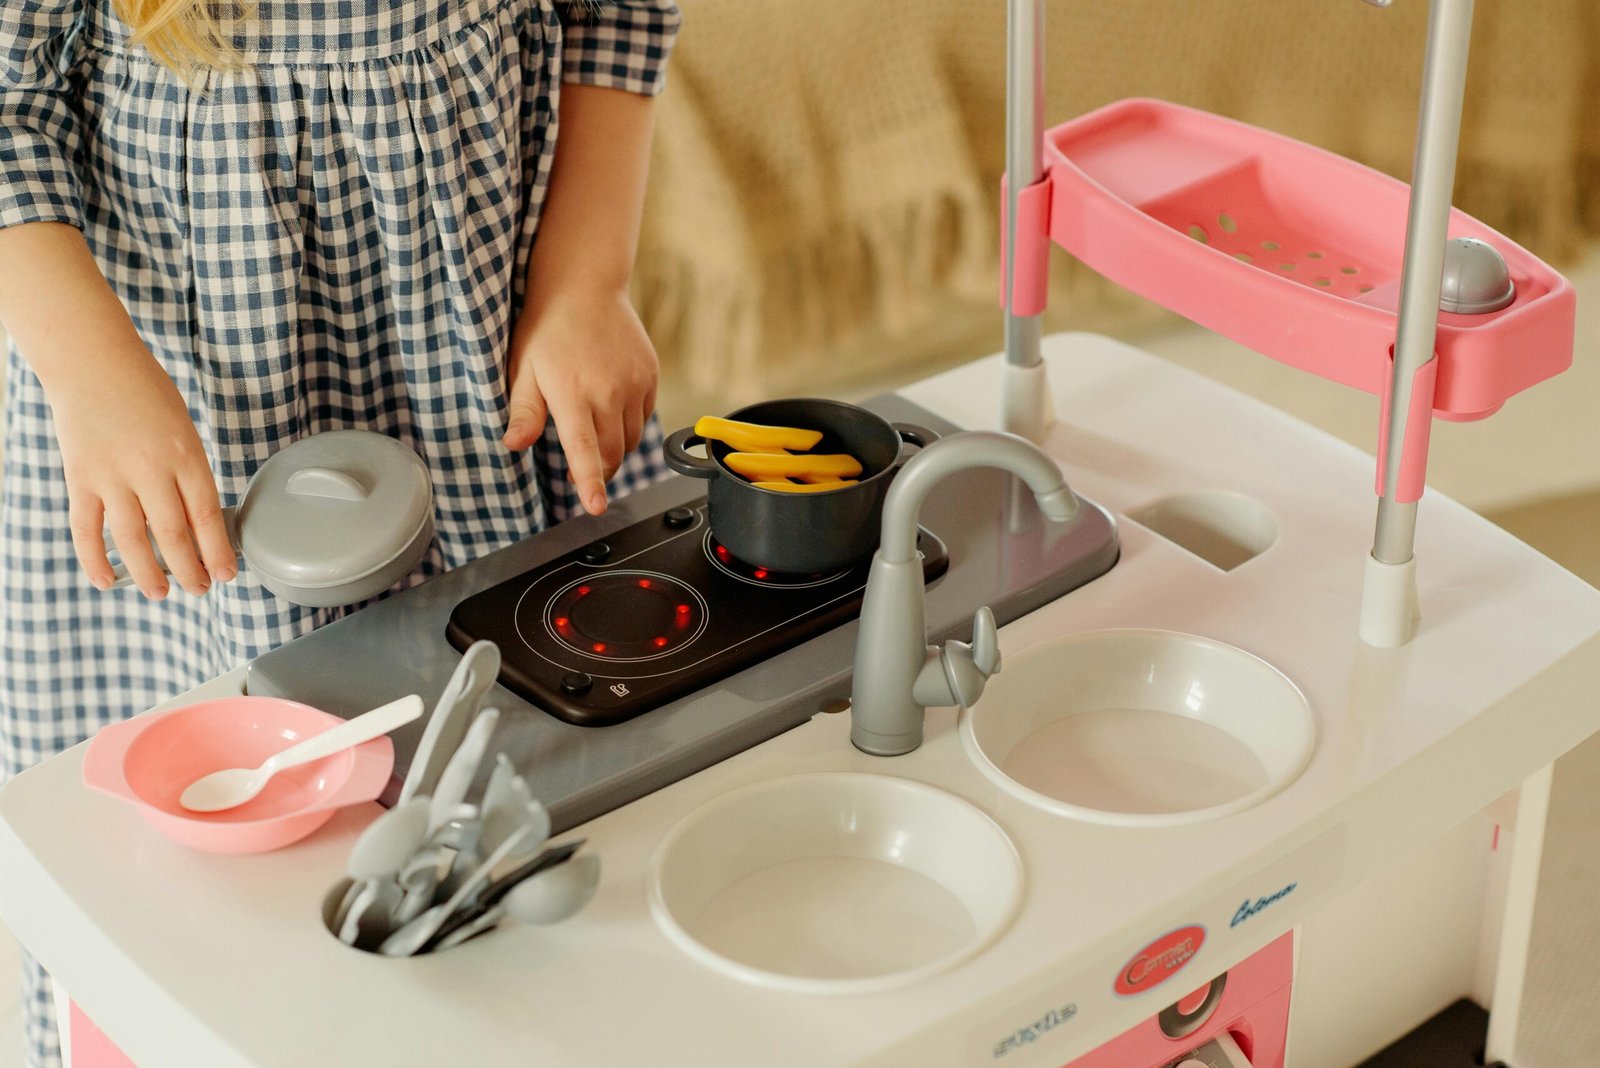 Girl playing with a kitchen toy